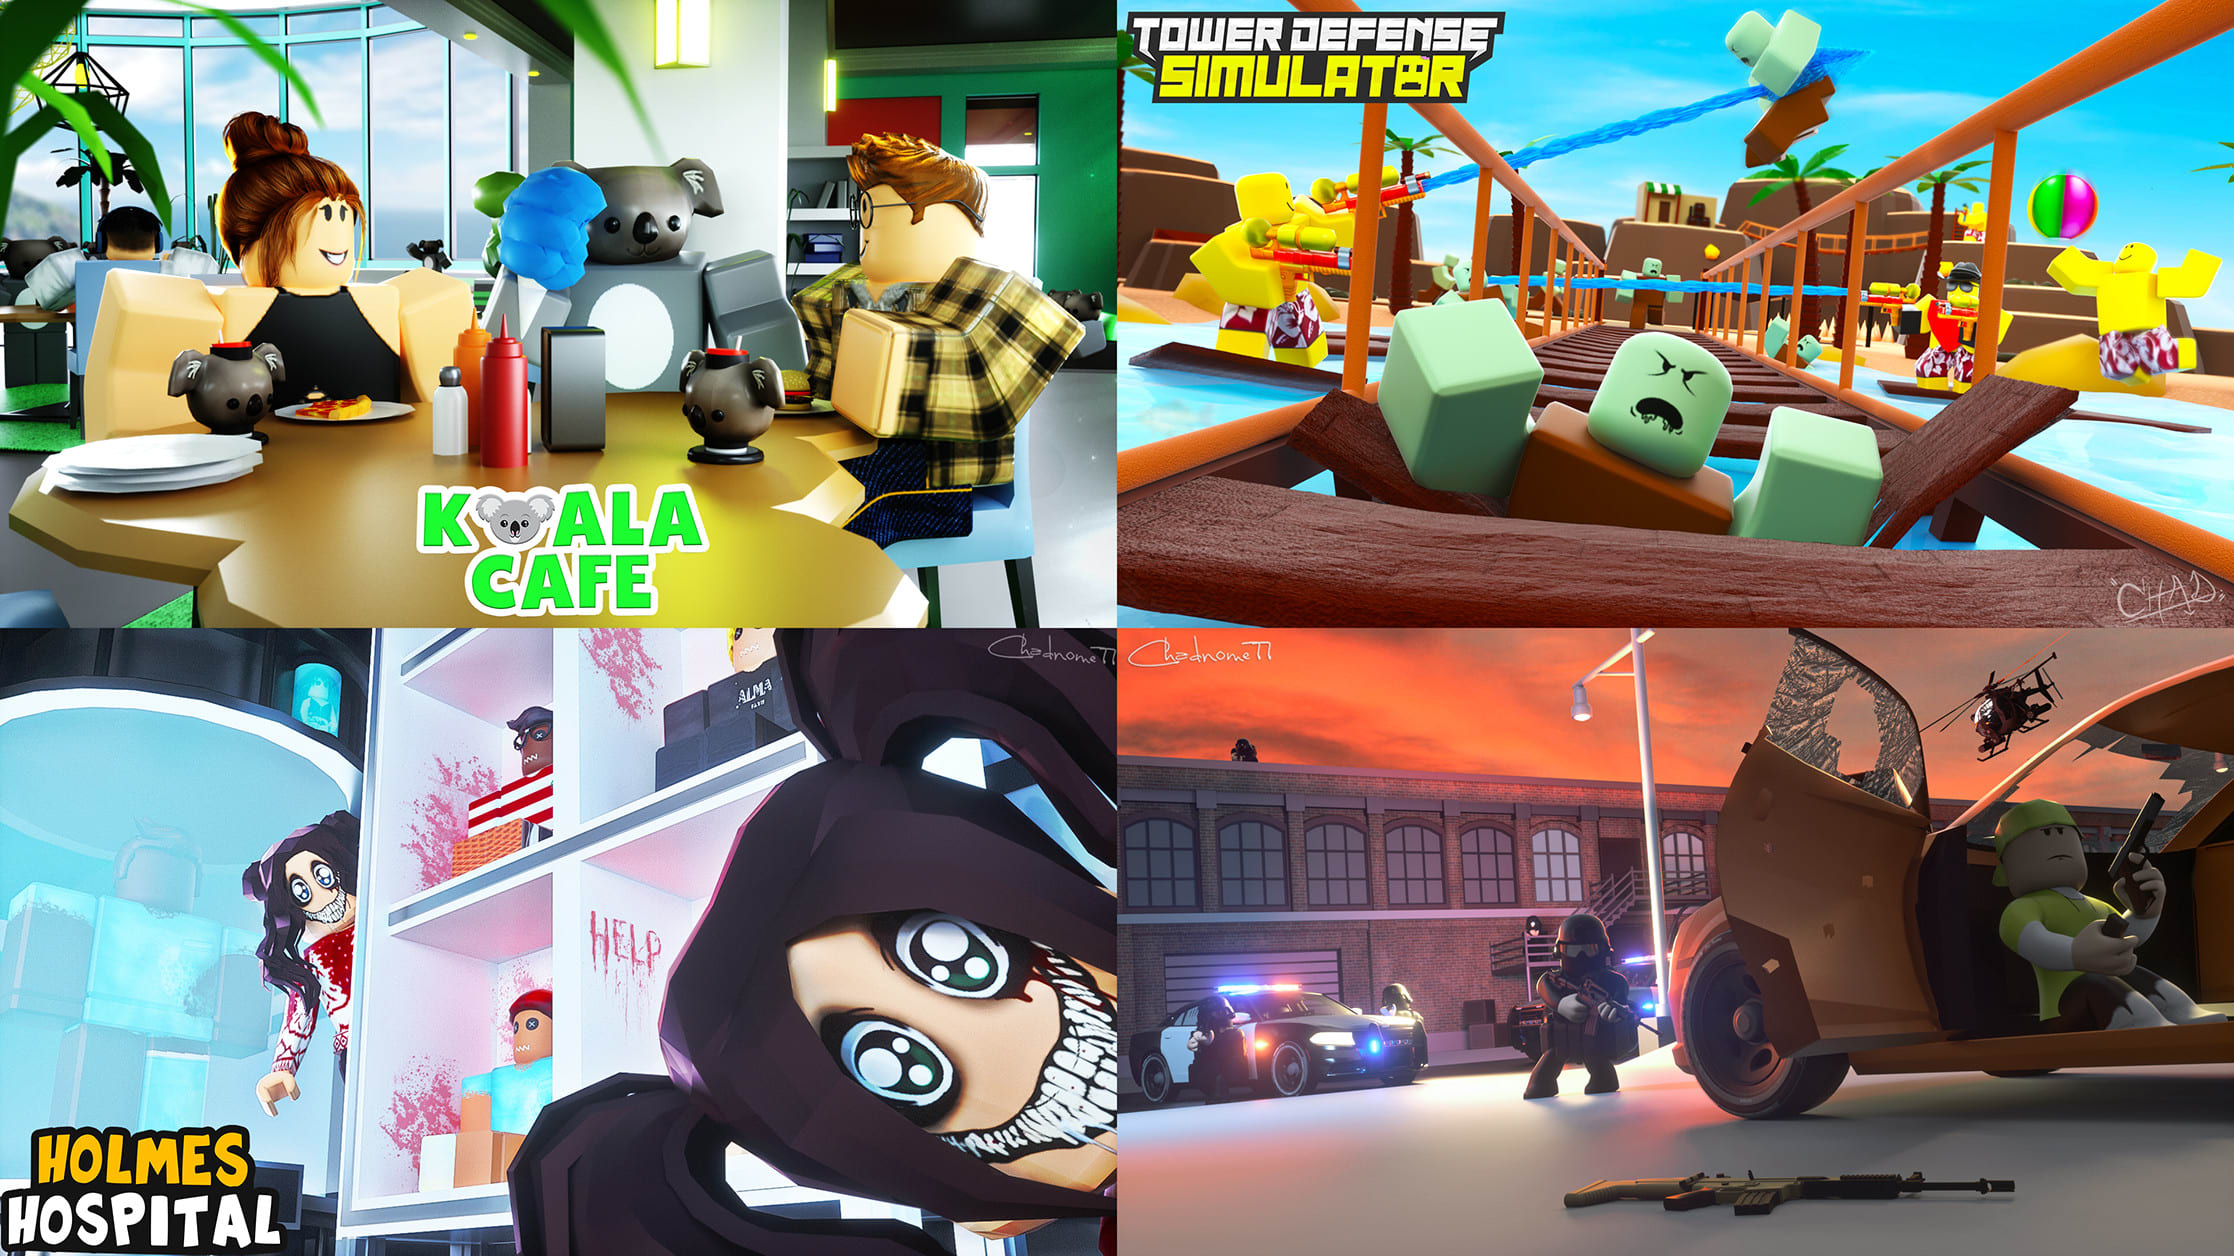 Make You High Quality Gfx For Your Game Or Group By Chadnome77 - roblox koala cafe application